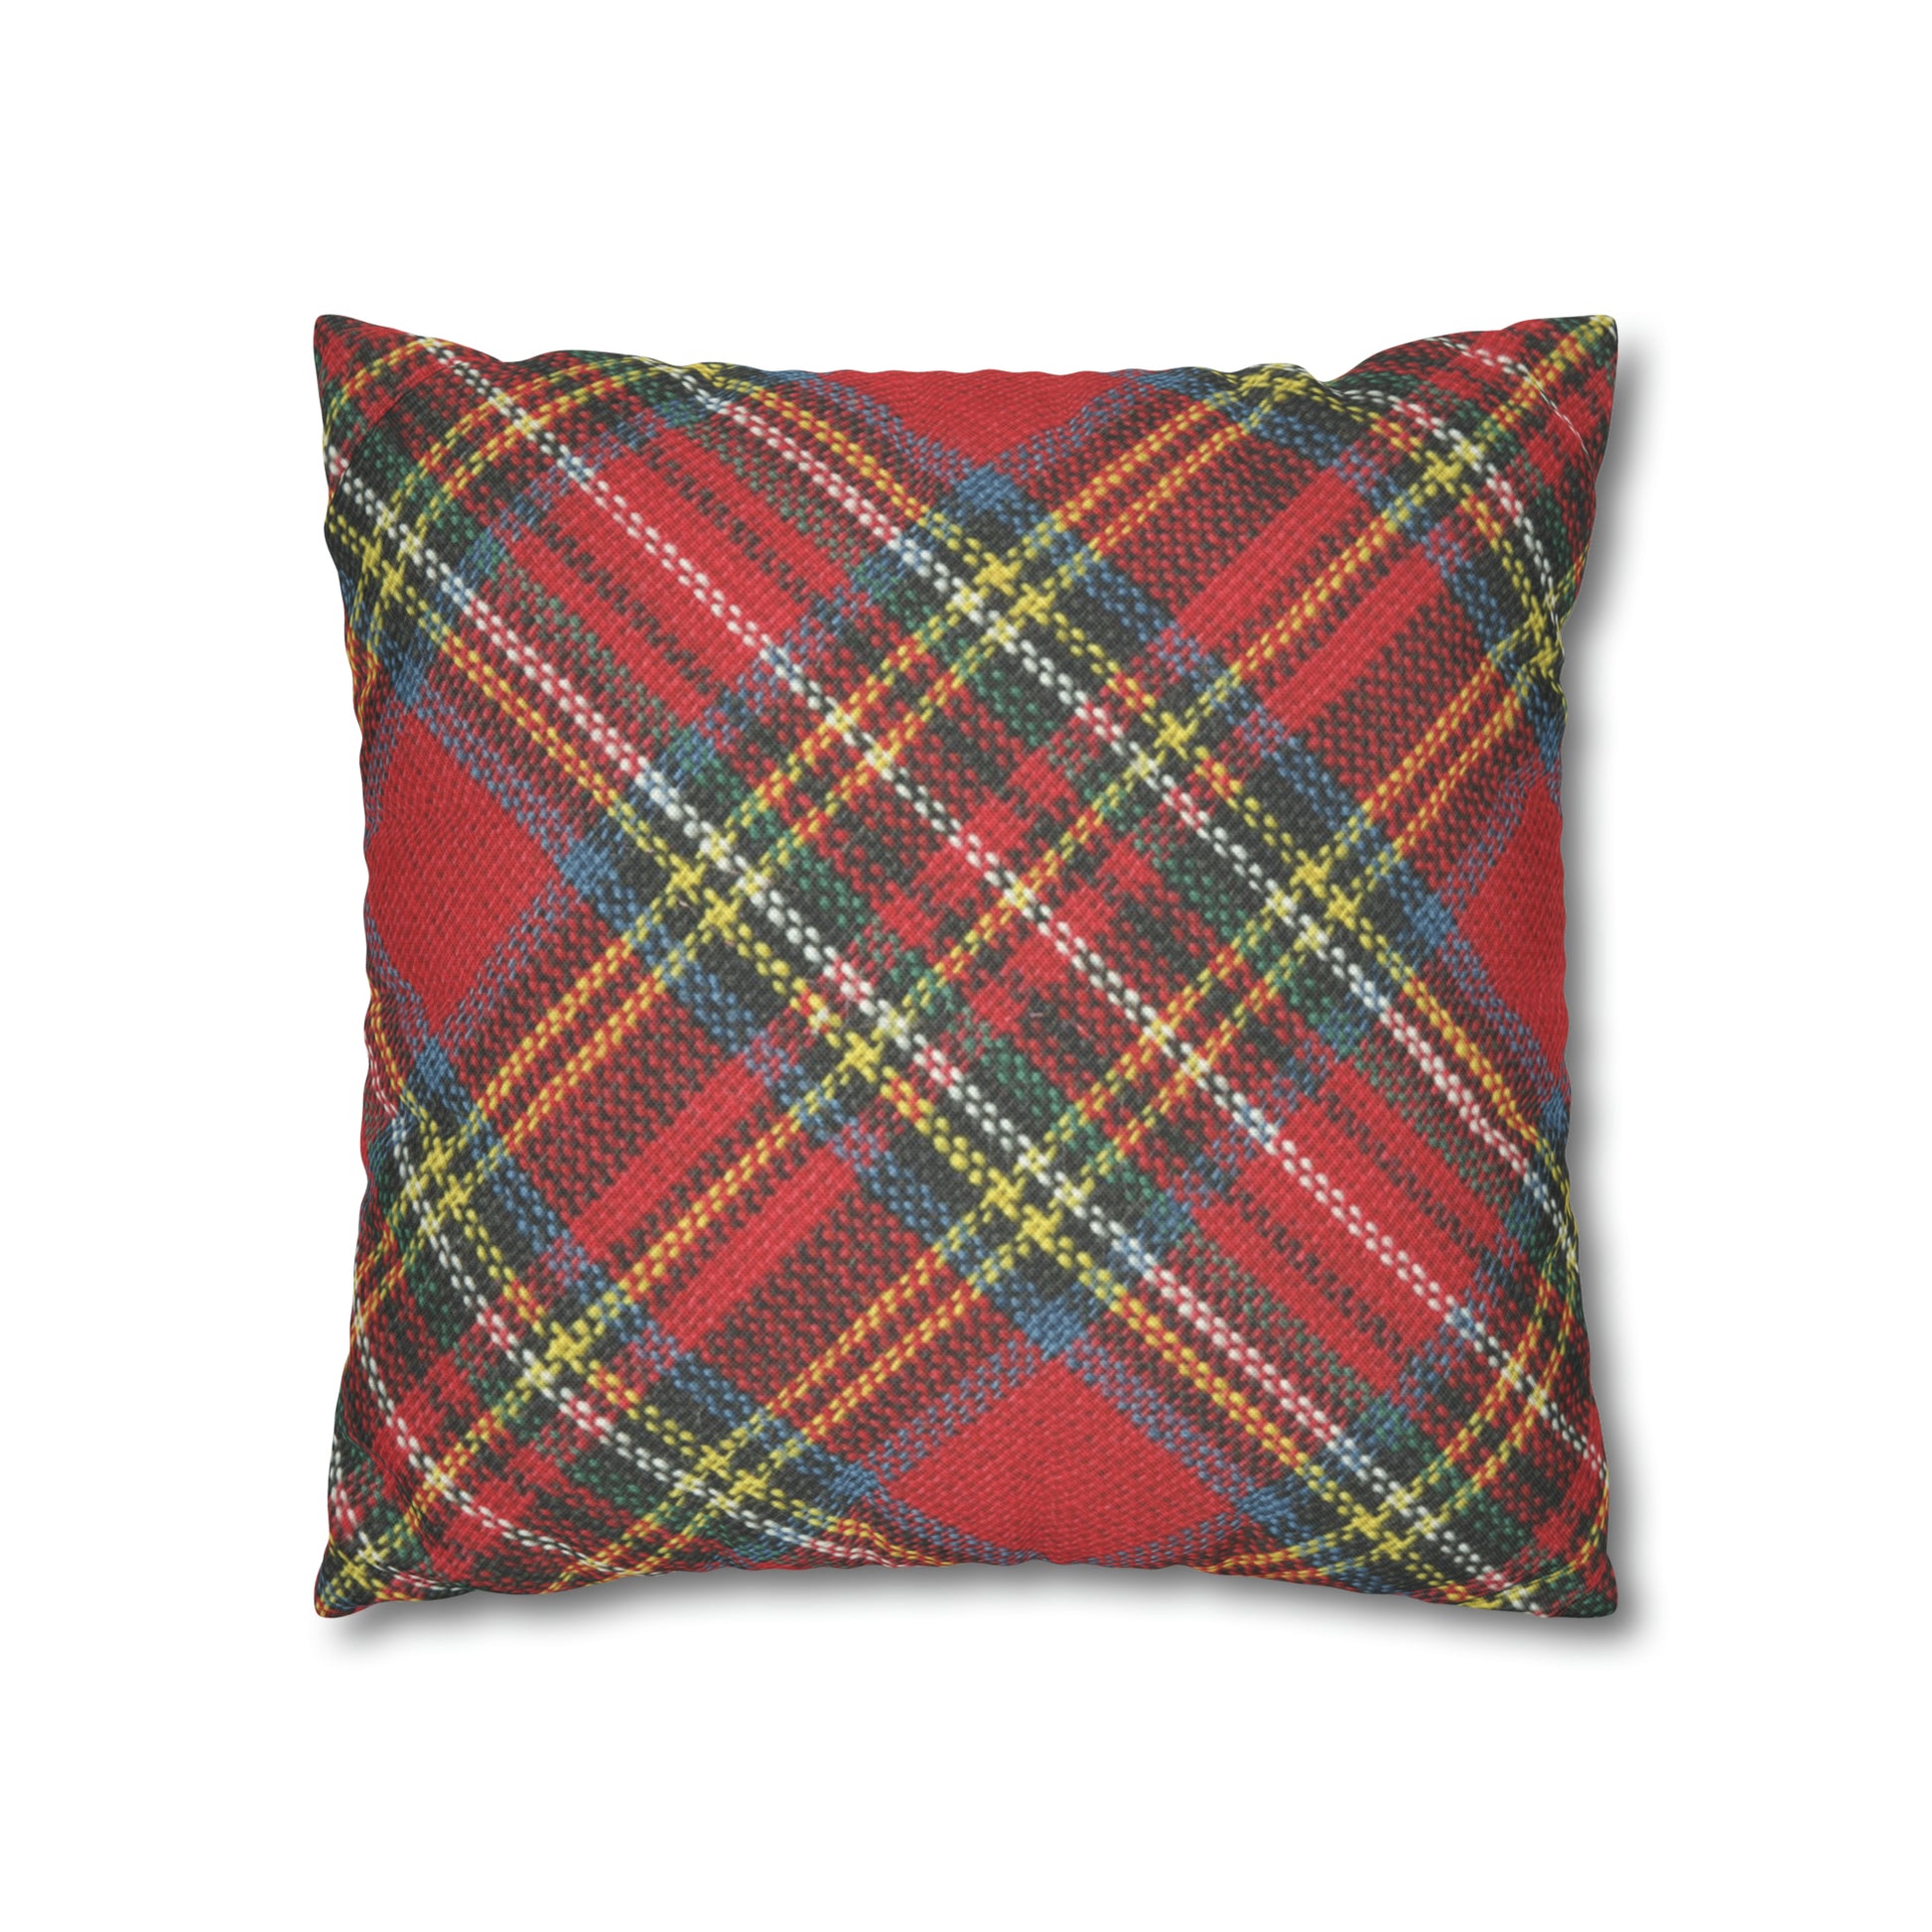 American made Scottish tartan cushion cover, perfect for adding a touch of cozy warmth to your home. This easy-care Printify Red-Plaid Pillow Case is a stylish and classic addition to any room.